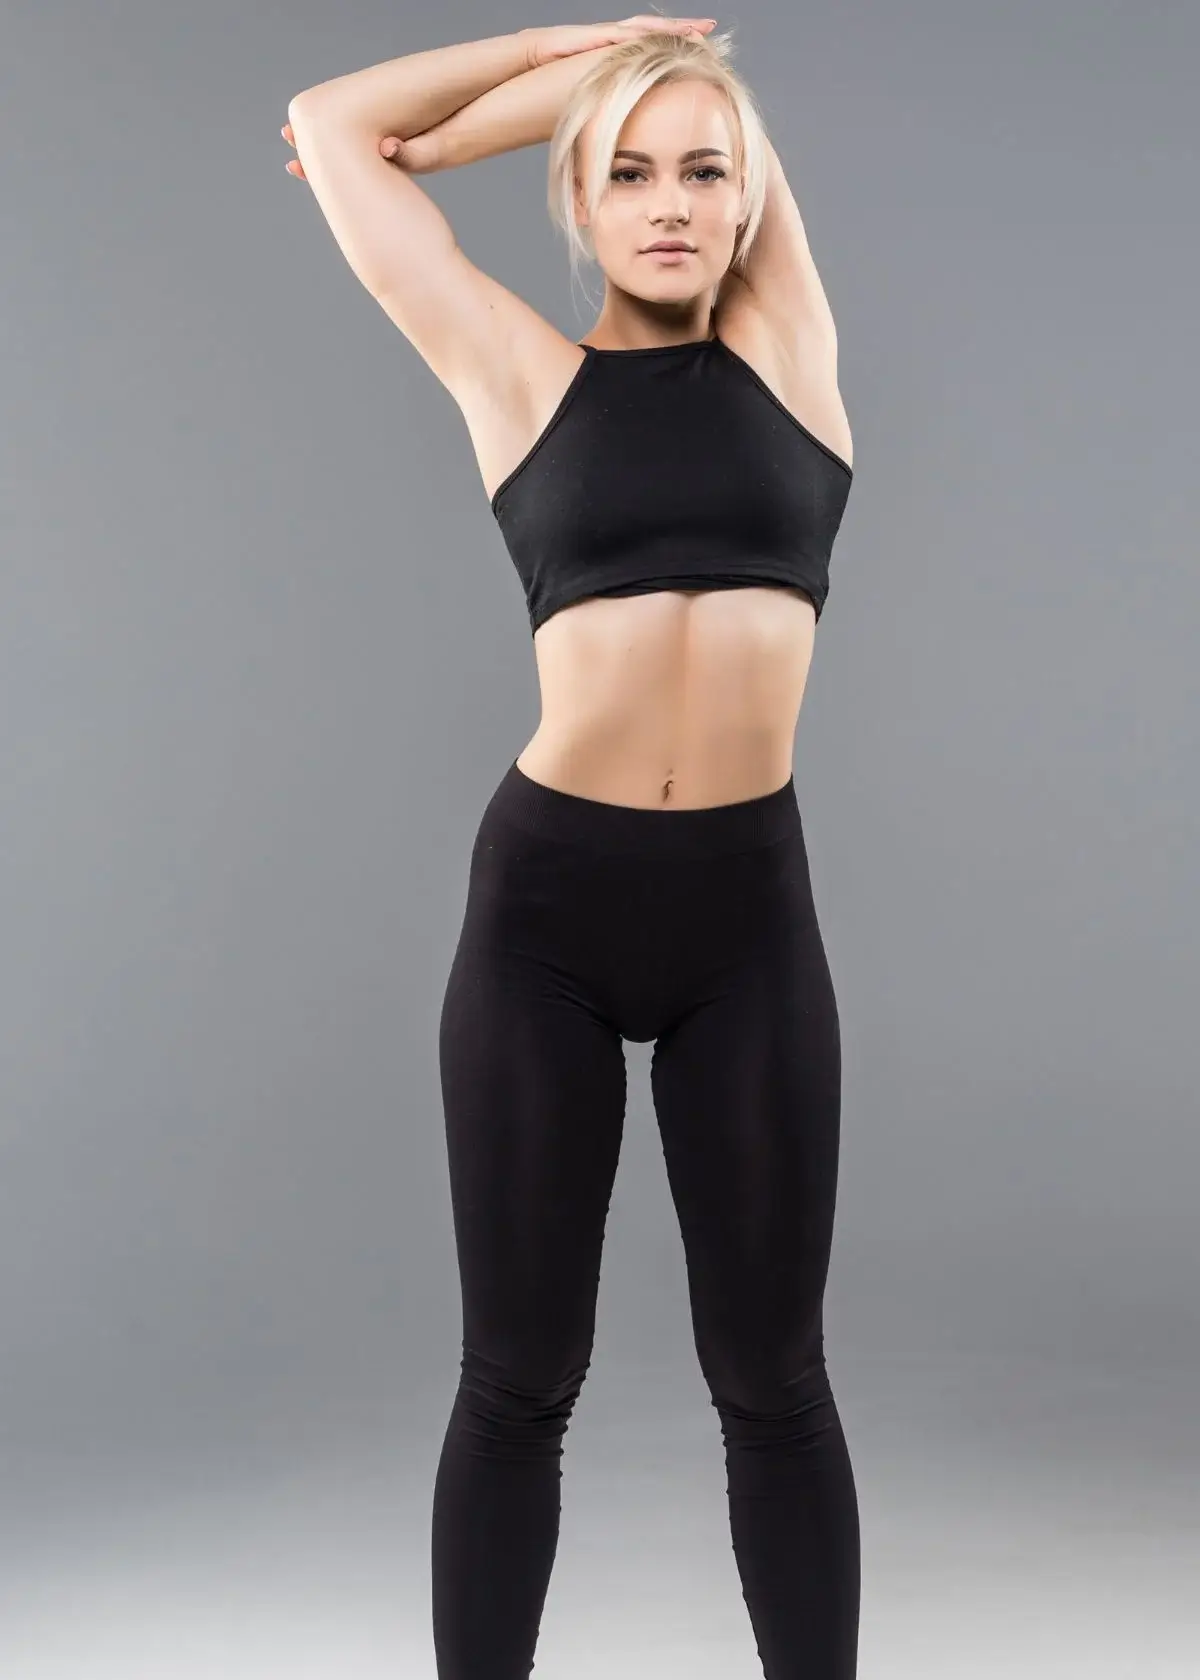 How to choose the right gym leggings?